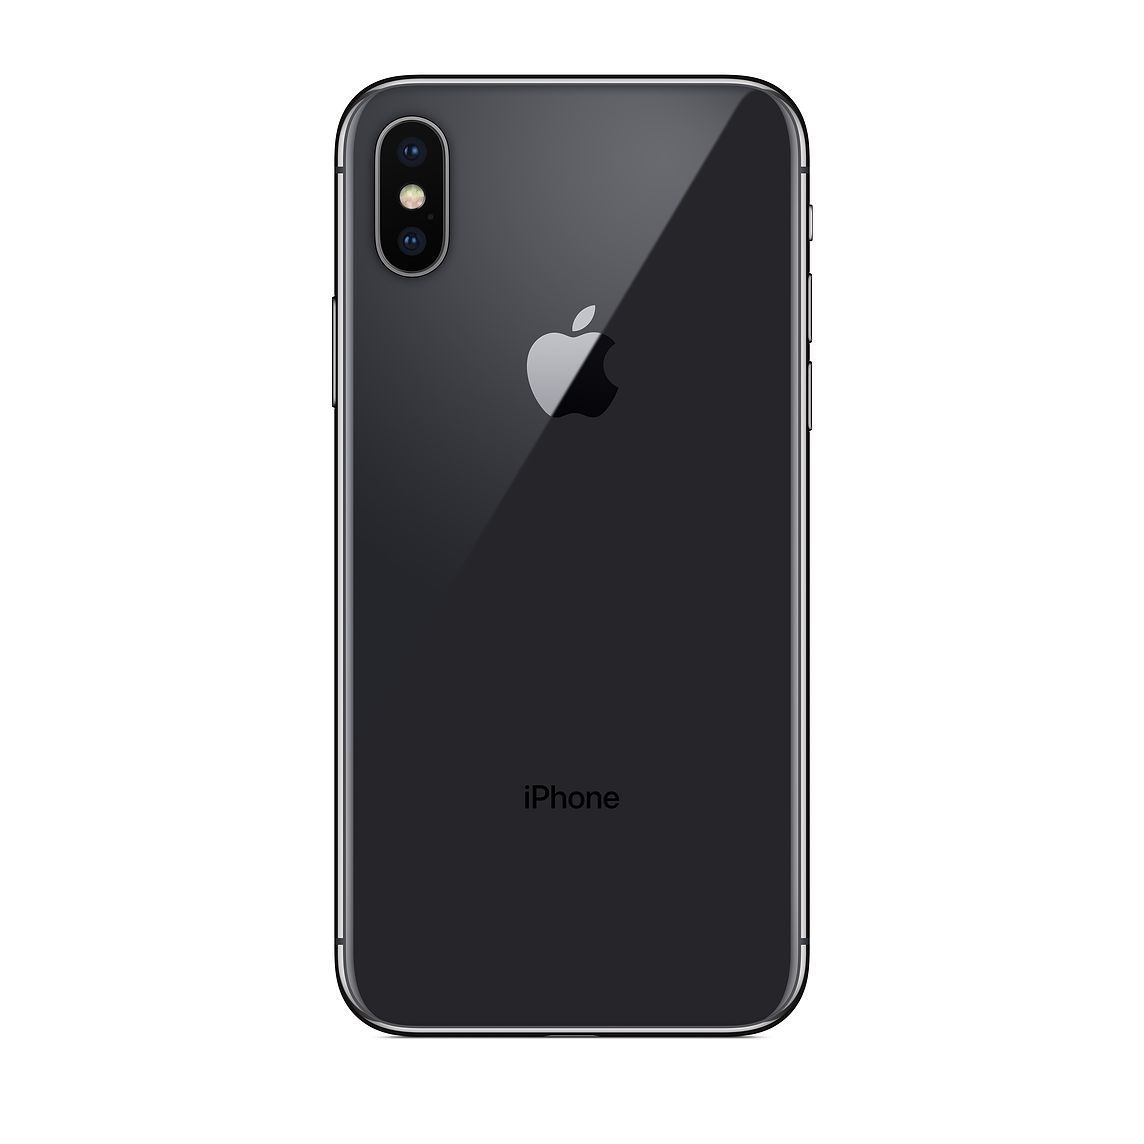 Apple, iPhone X, 64GB, Unlocked to any Network, 12 Months Warranty – 256GB / SpaceGray